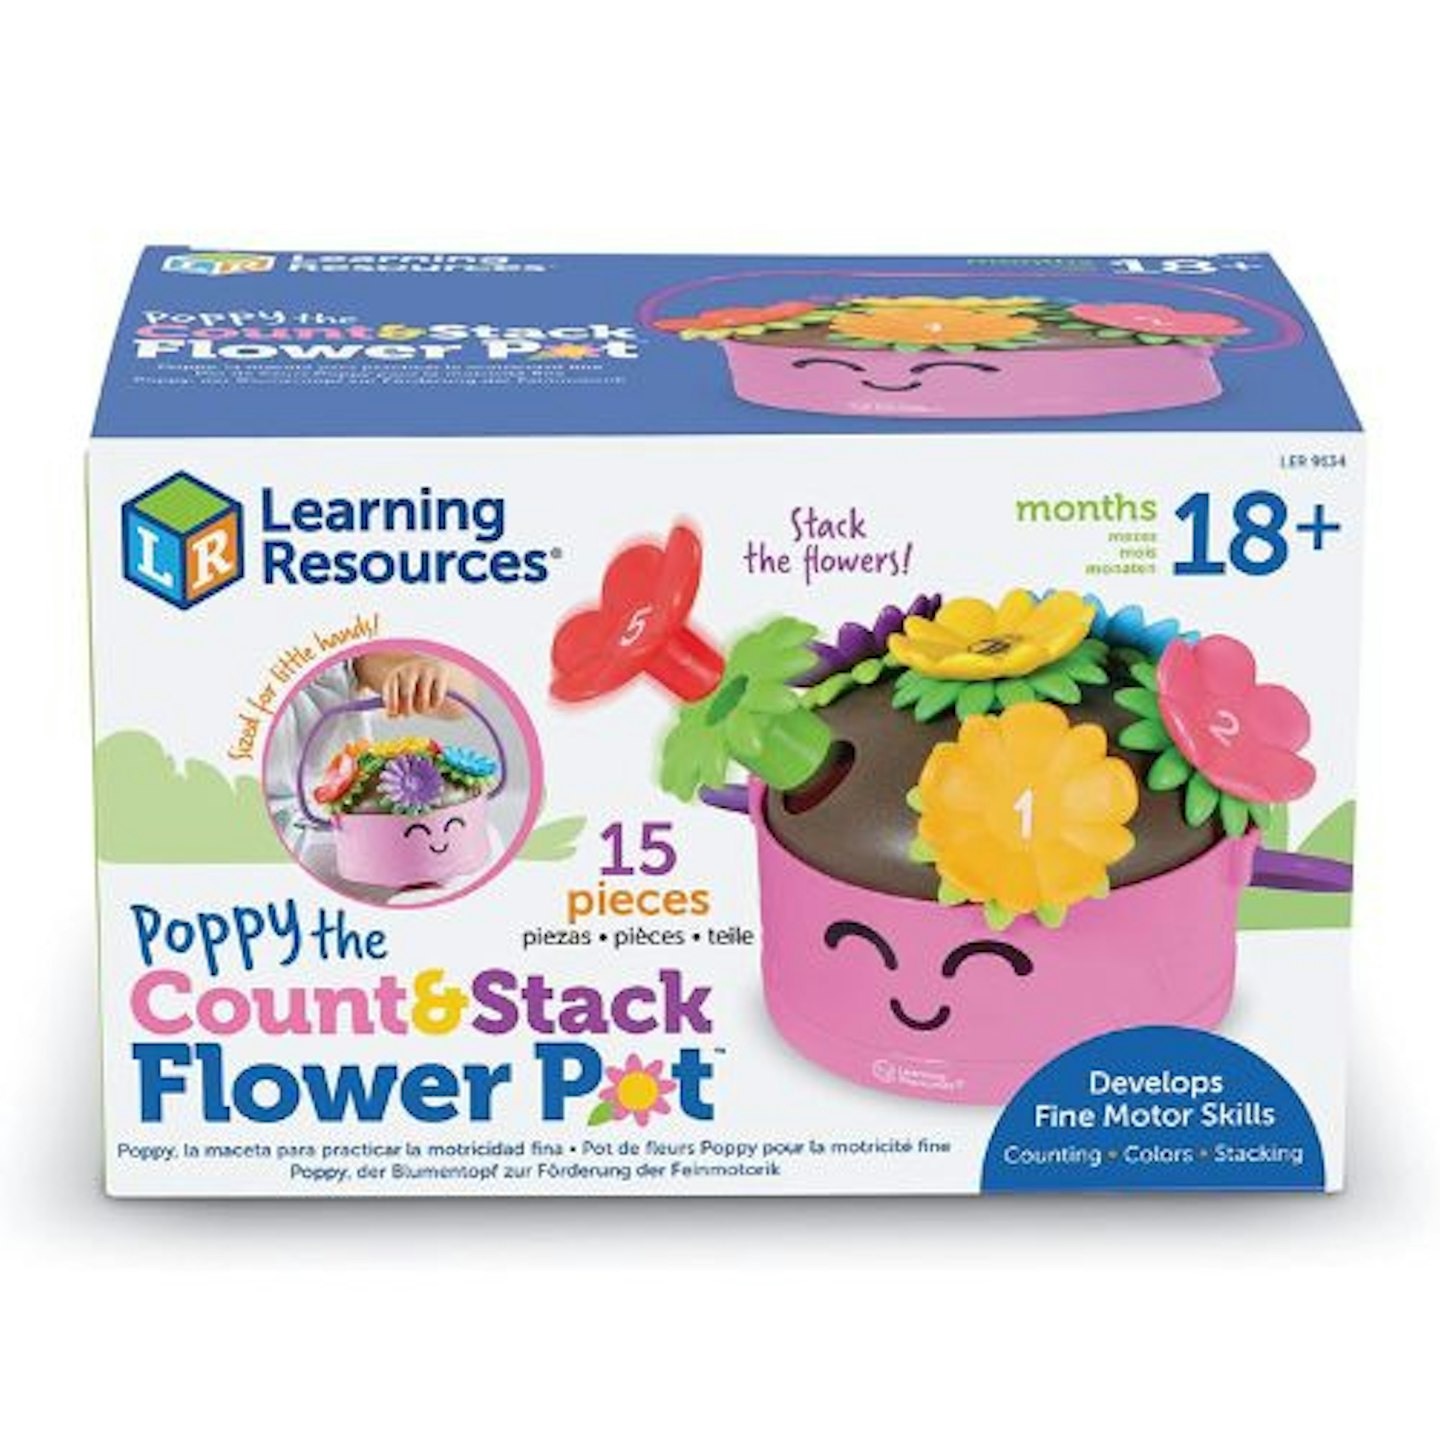 Learning Resources Poppy the Count & Stack Flower Pot